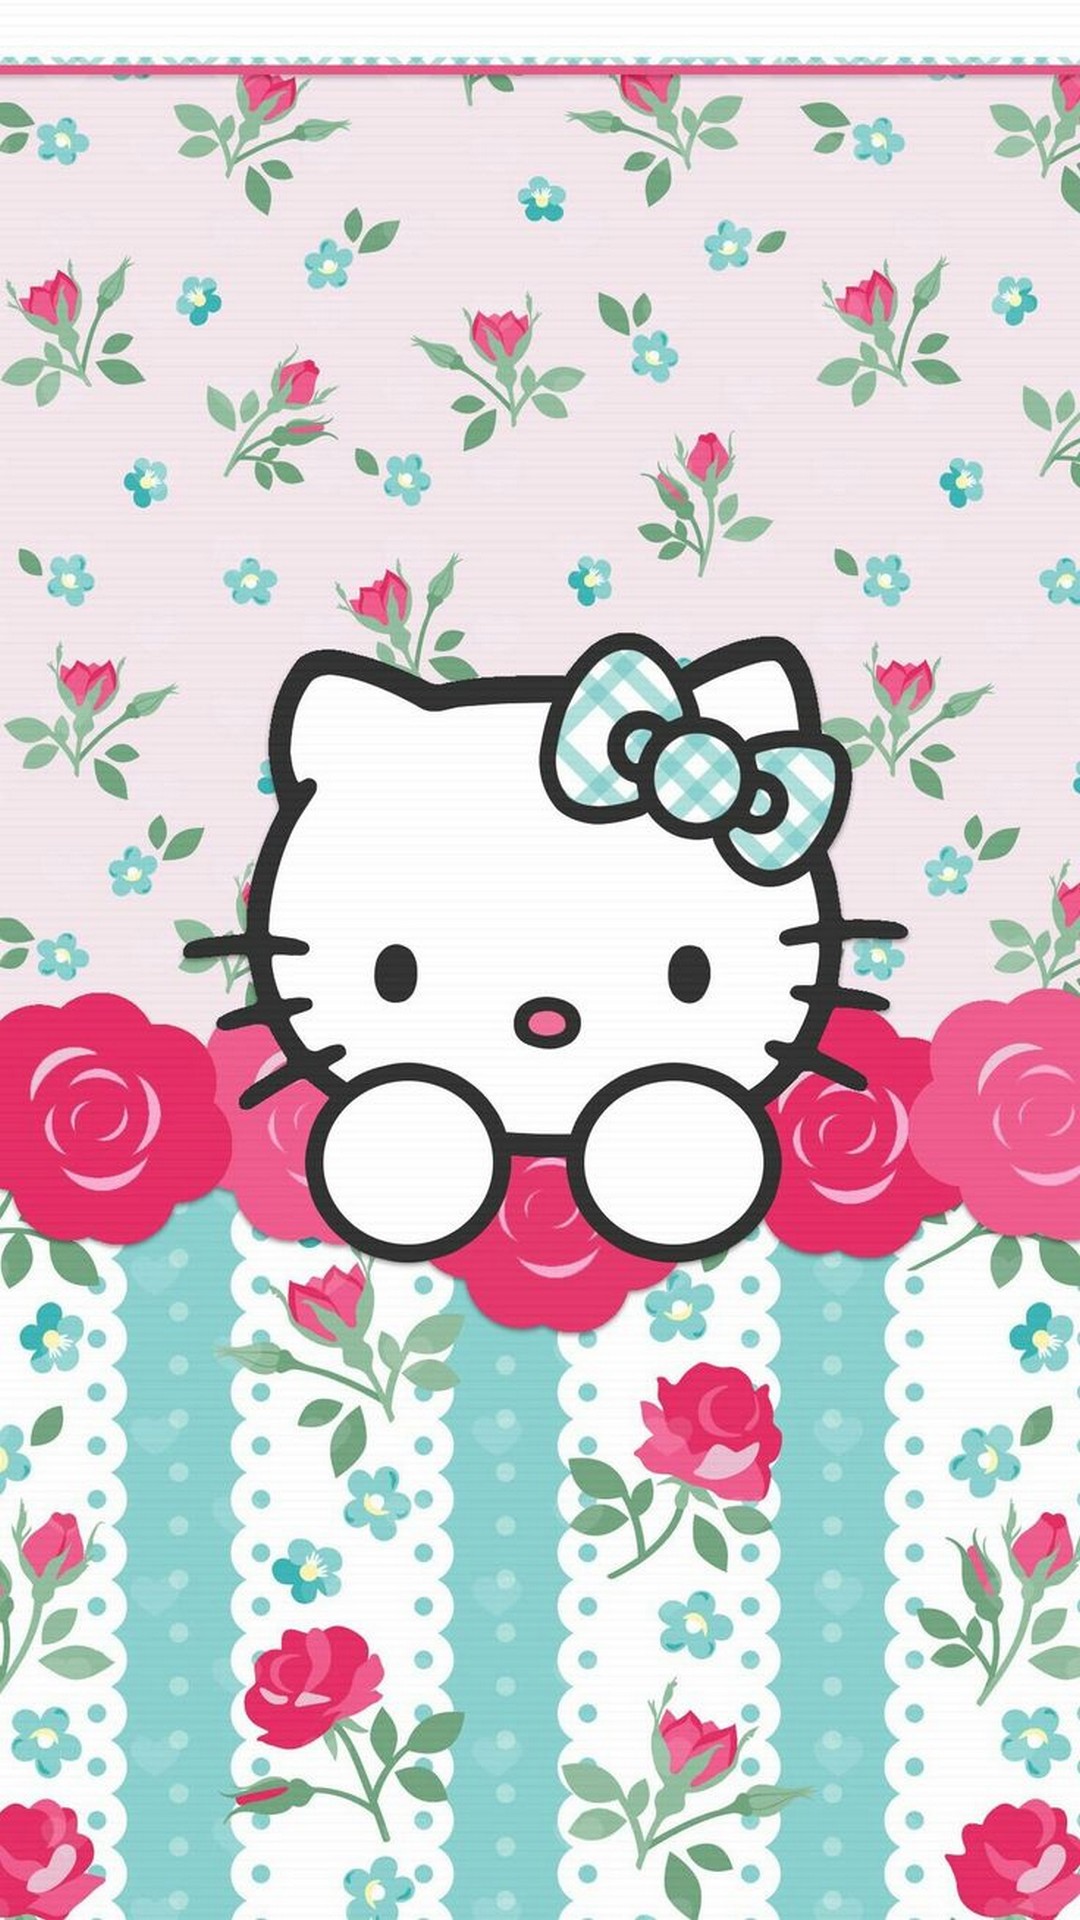 Hello Kitty Images iPhone Wallpaper with image resolution 1080x1920 pixel. You can make this wallpaper for your iPhone 5, 6, 7, 8, X backgrounds, Mobile Screensaver, or iPad Lock Screen